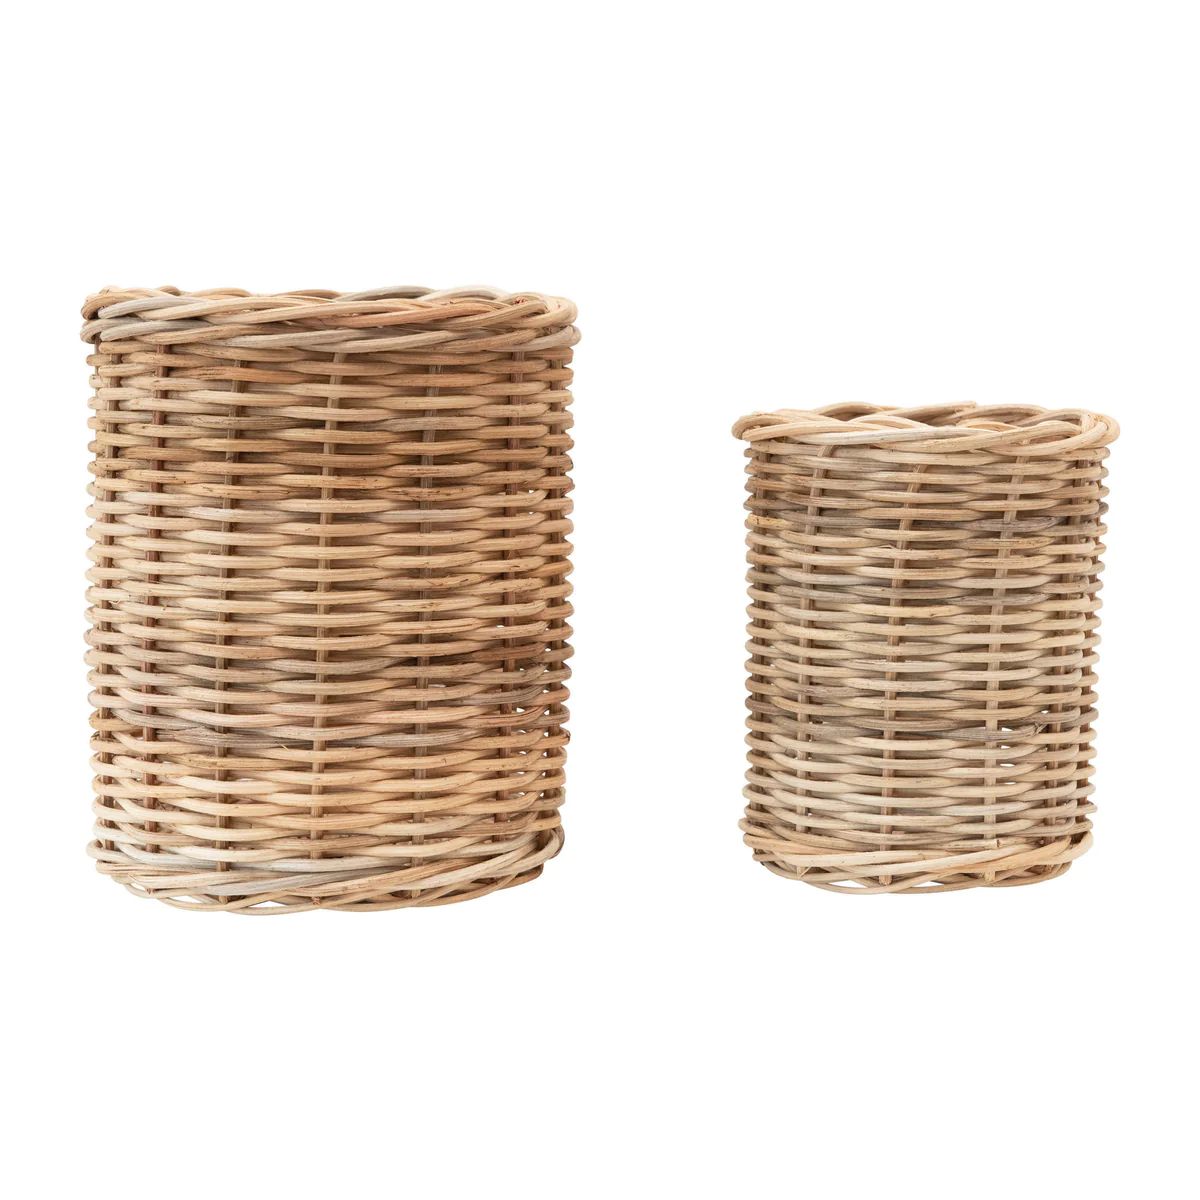 Hand Woven Wicker Basket Container | Well Worn Interiors